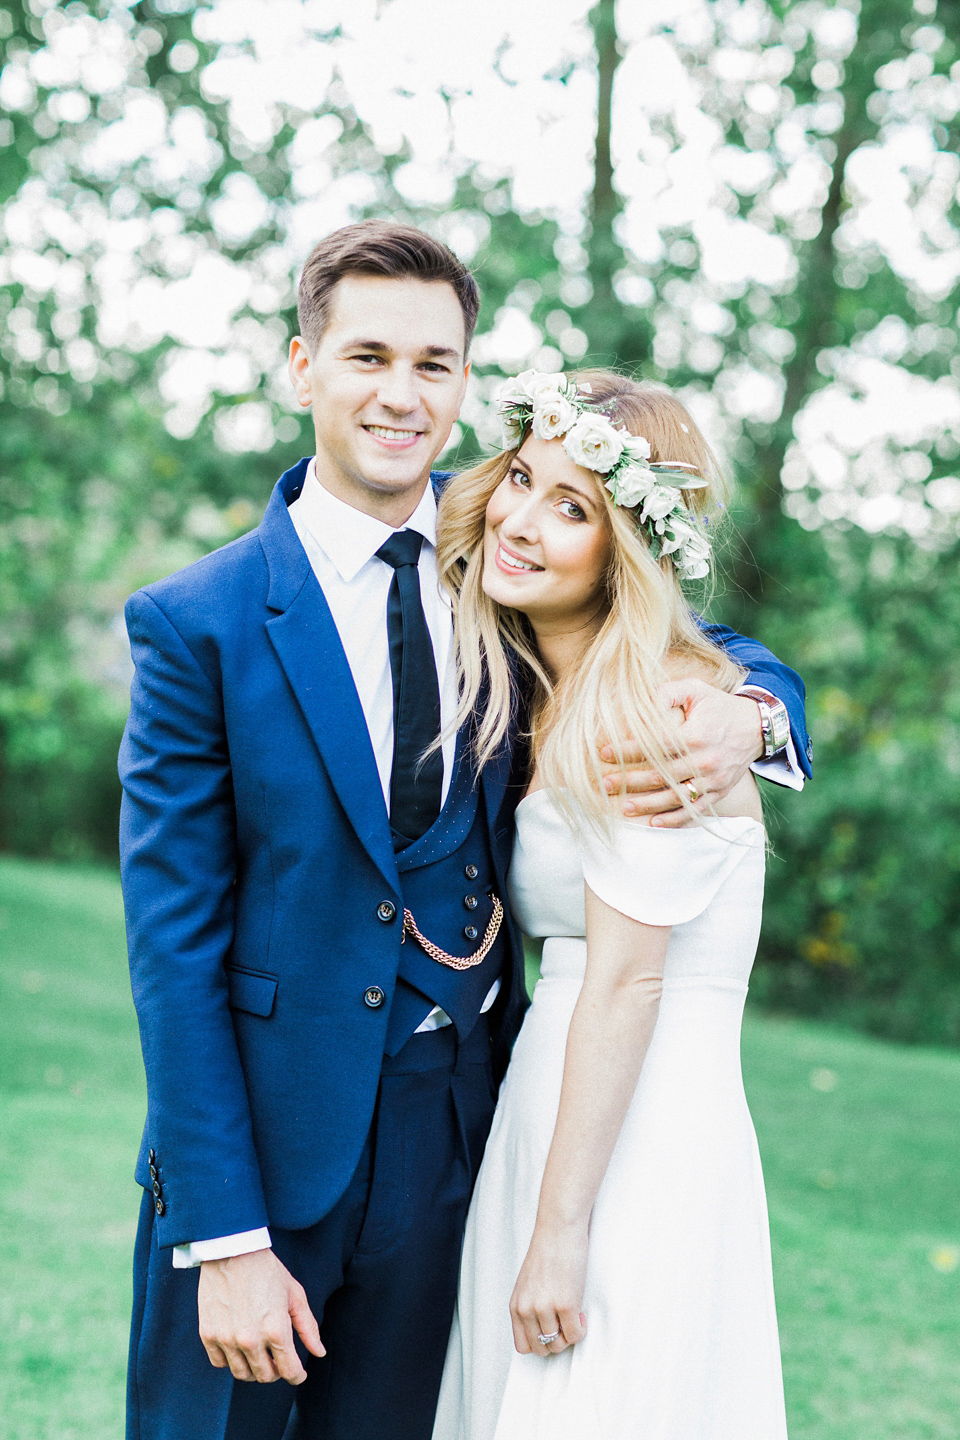 A 1970's California and Bohemian inspired wedding. Photography by Bowtie & Belle.